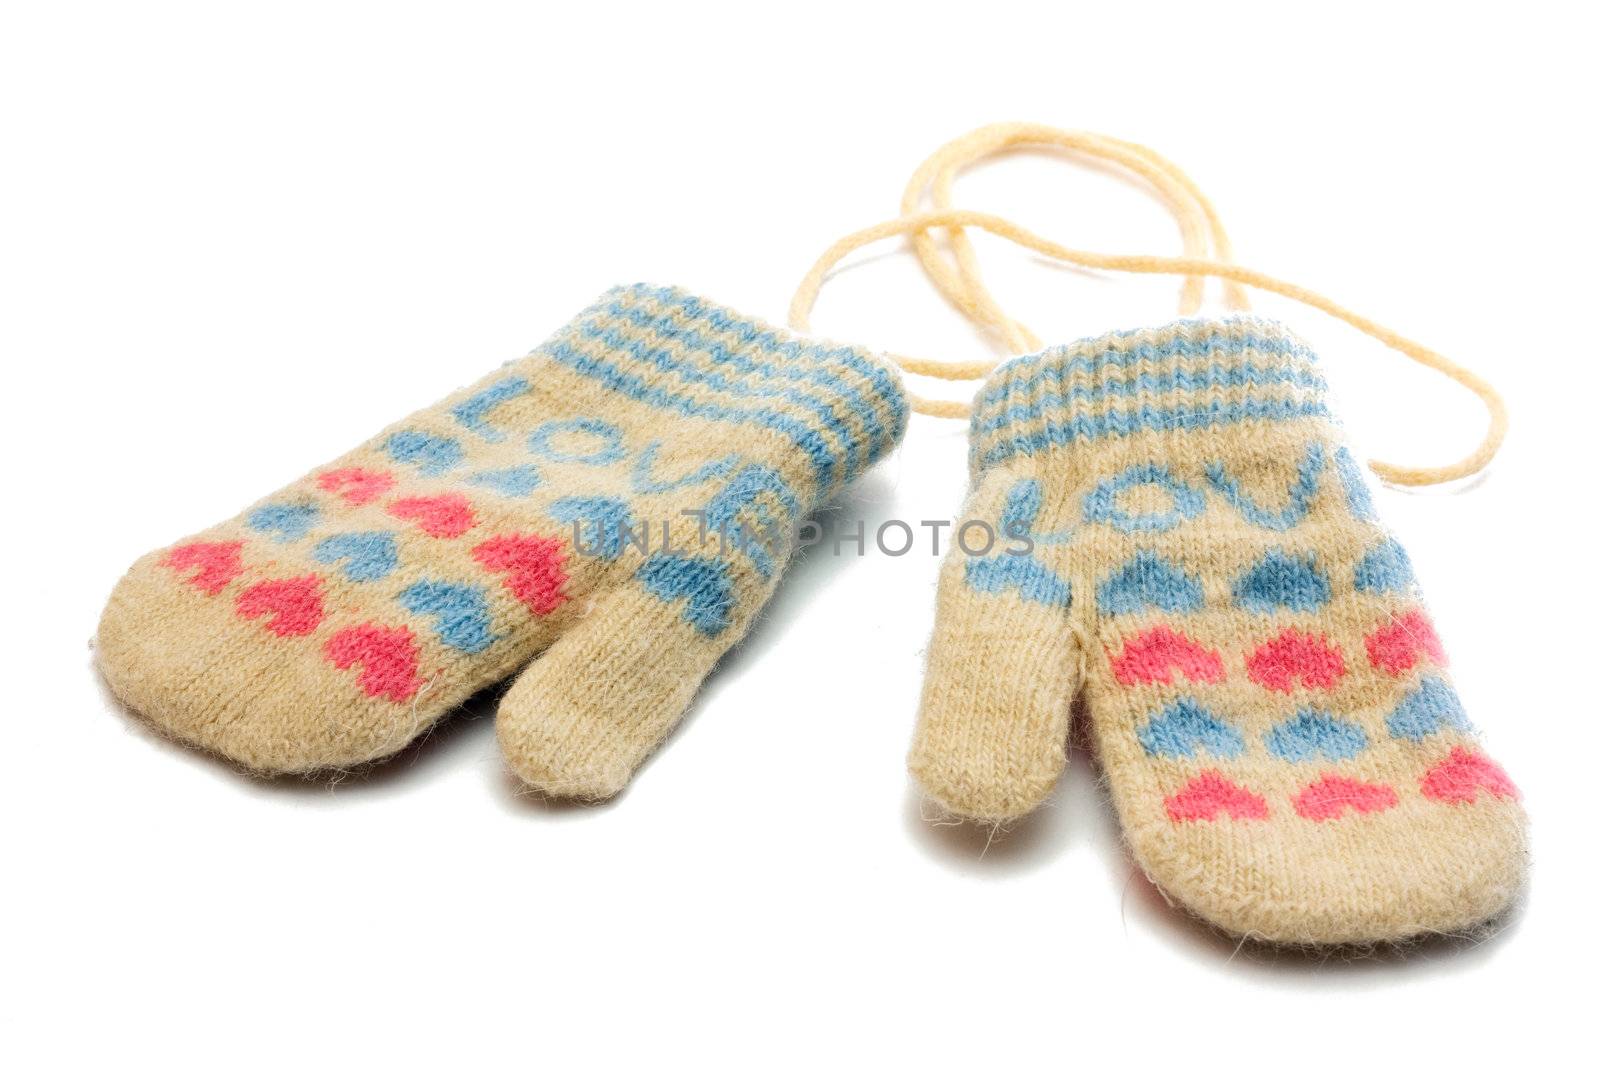 Little baby mittens/gloves isolated on white background